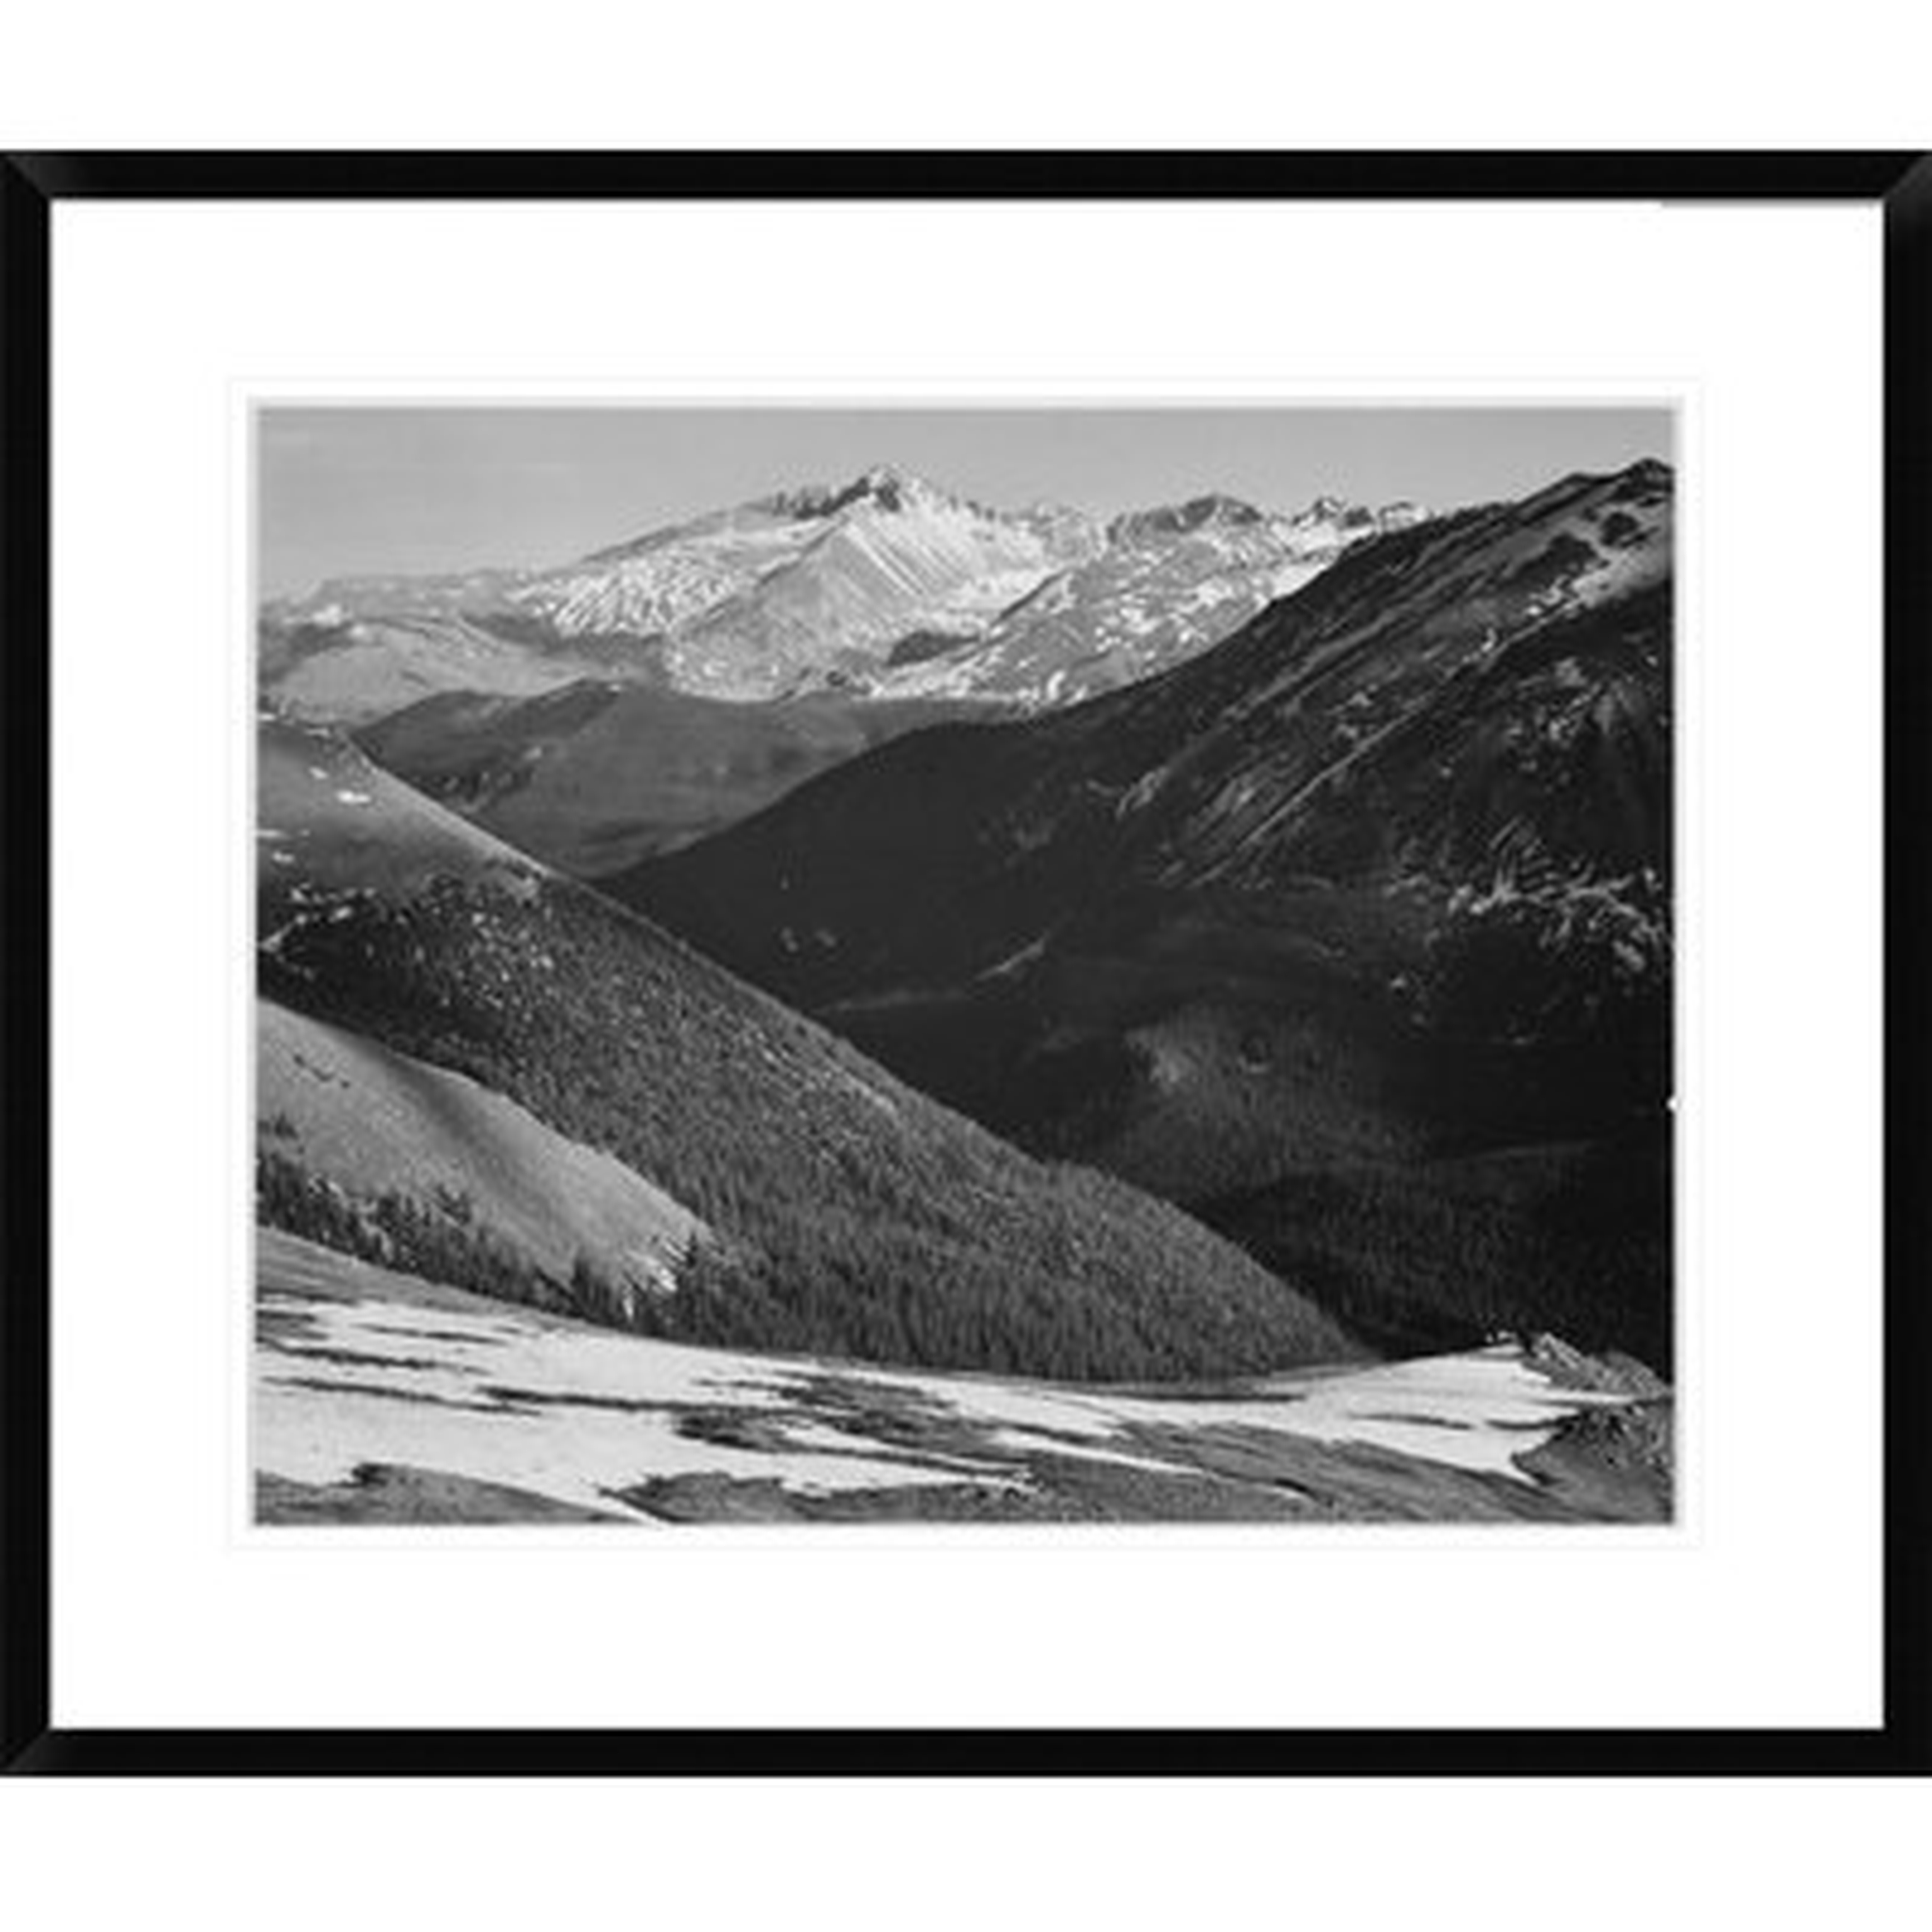 'Long's Peak in Rocky Mountain National Park, Colorado, CA. 1941-1942' by Ansel Adams - Picture Frame Photograph Print on Paper - Wayfair